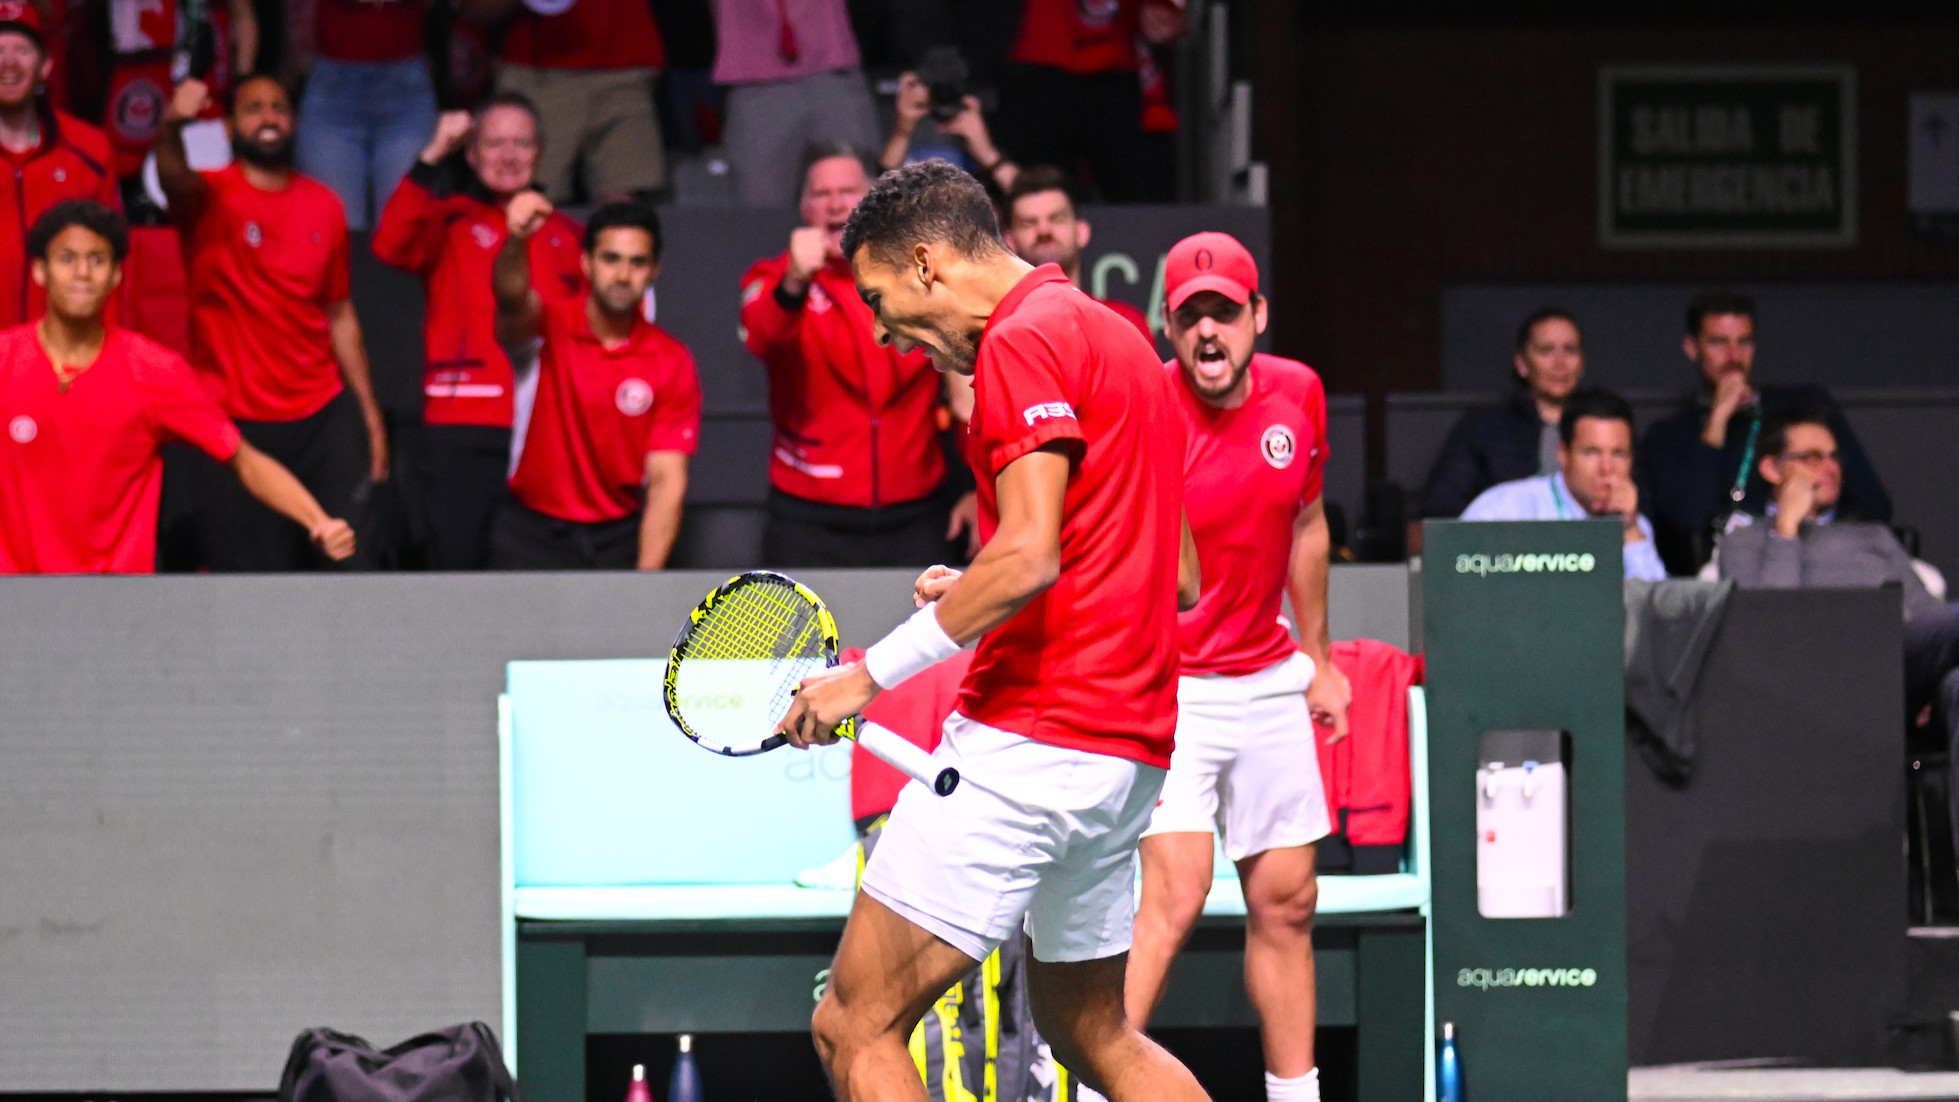 Canada is relishing a return to Malaga to defend its Davis Cup title